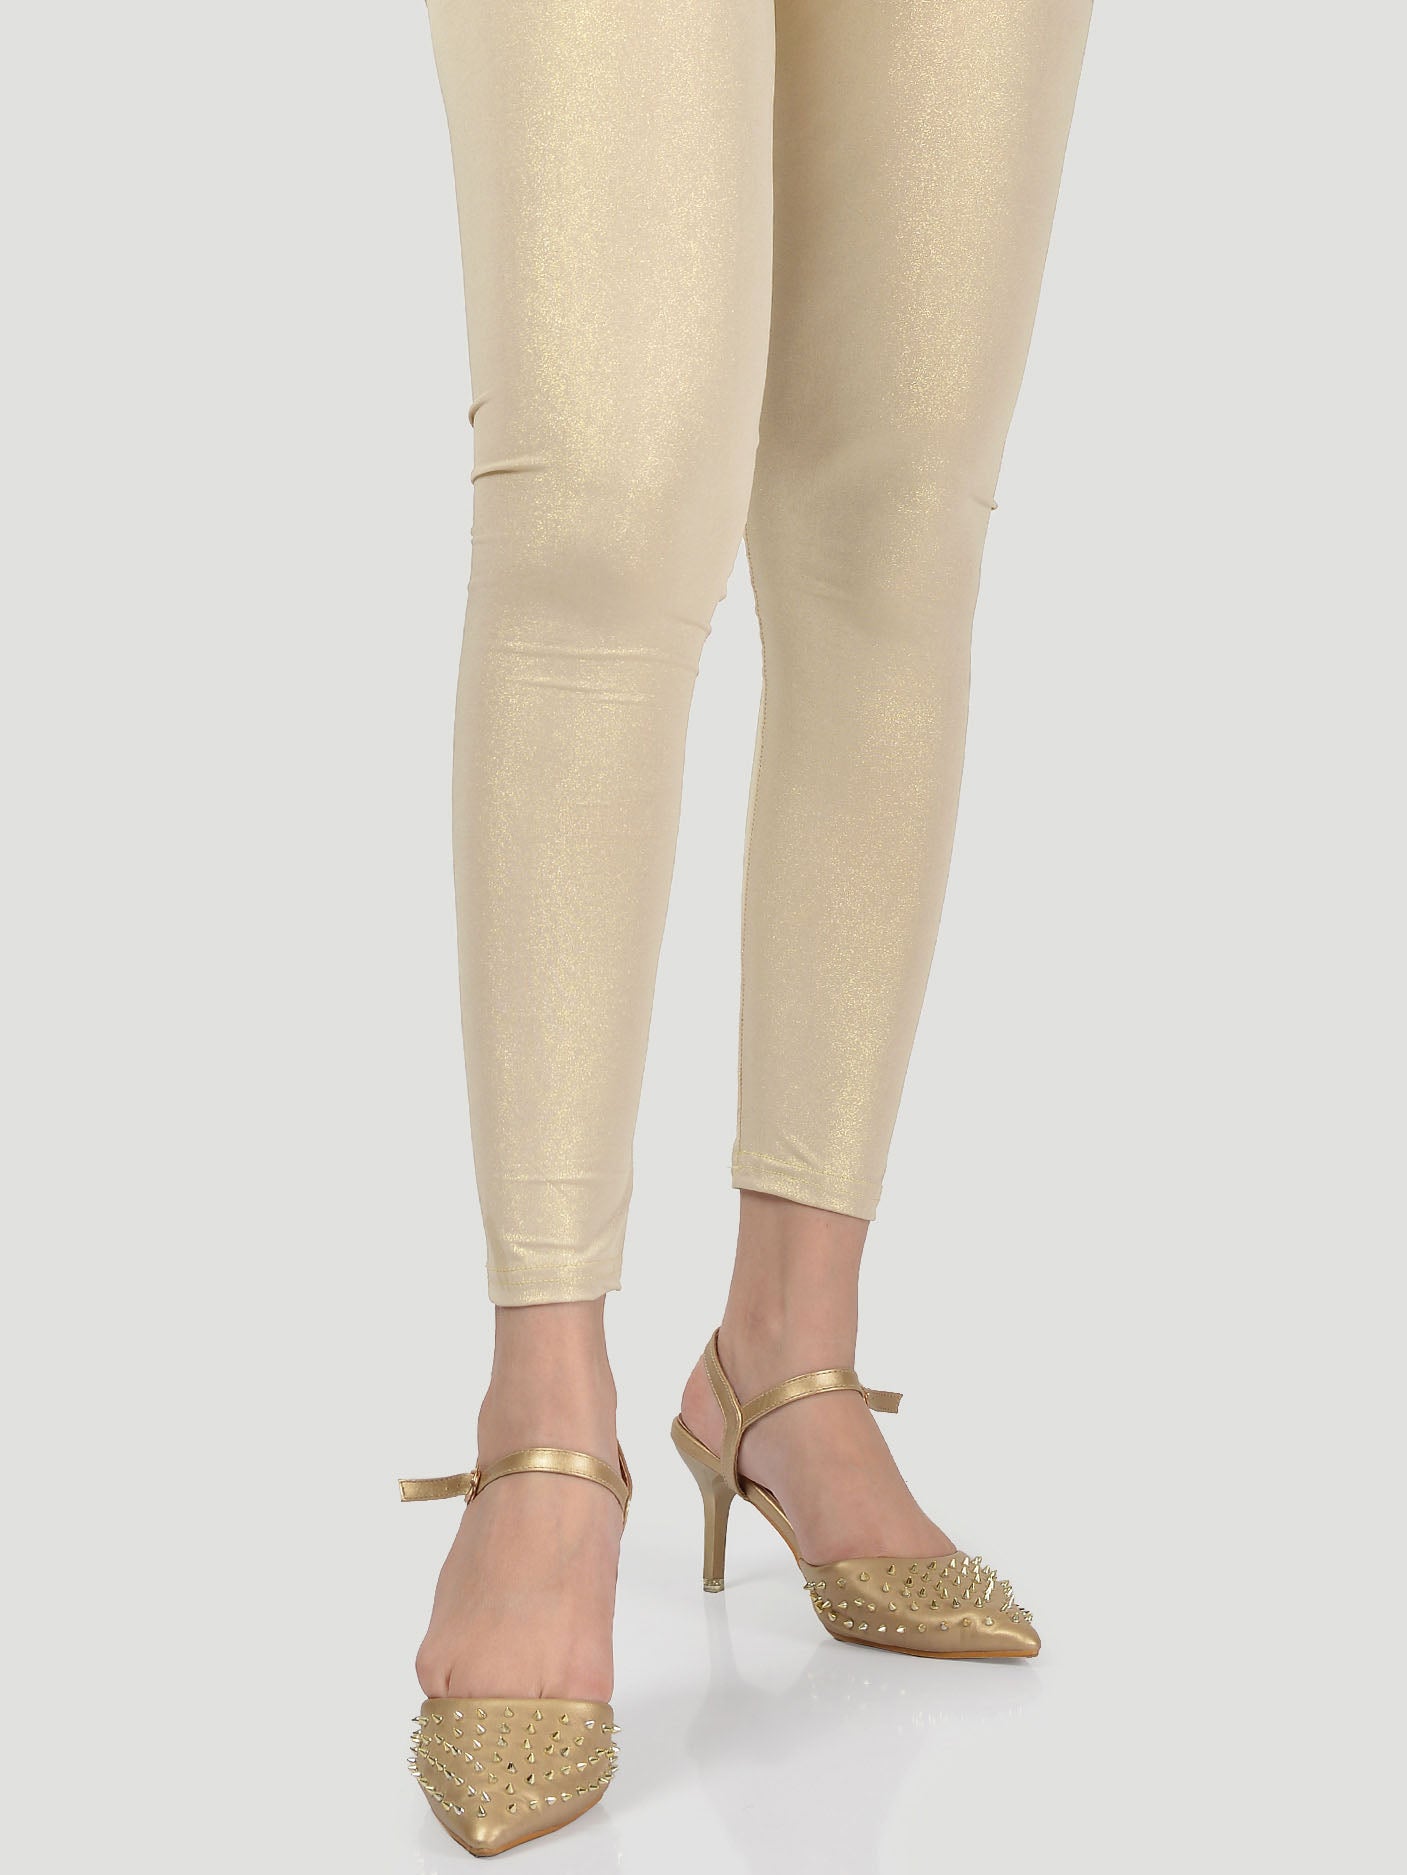 Shimmer Tights - Yellow Gold